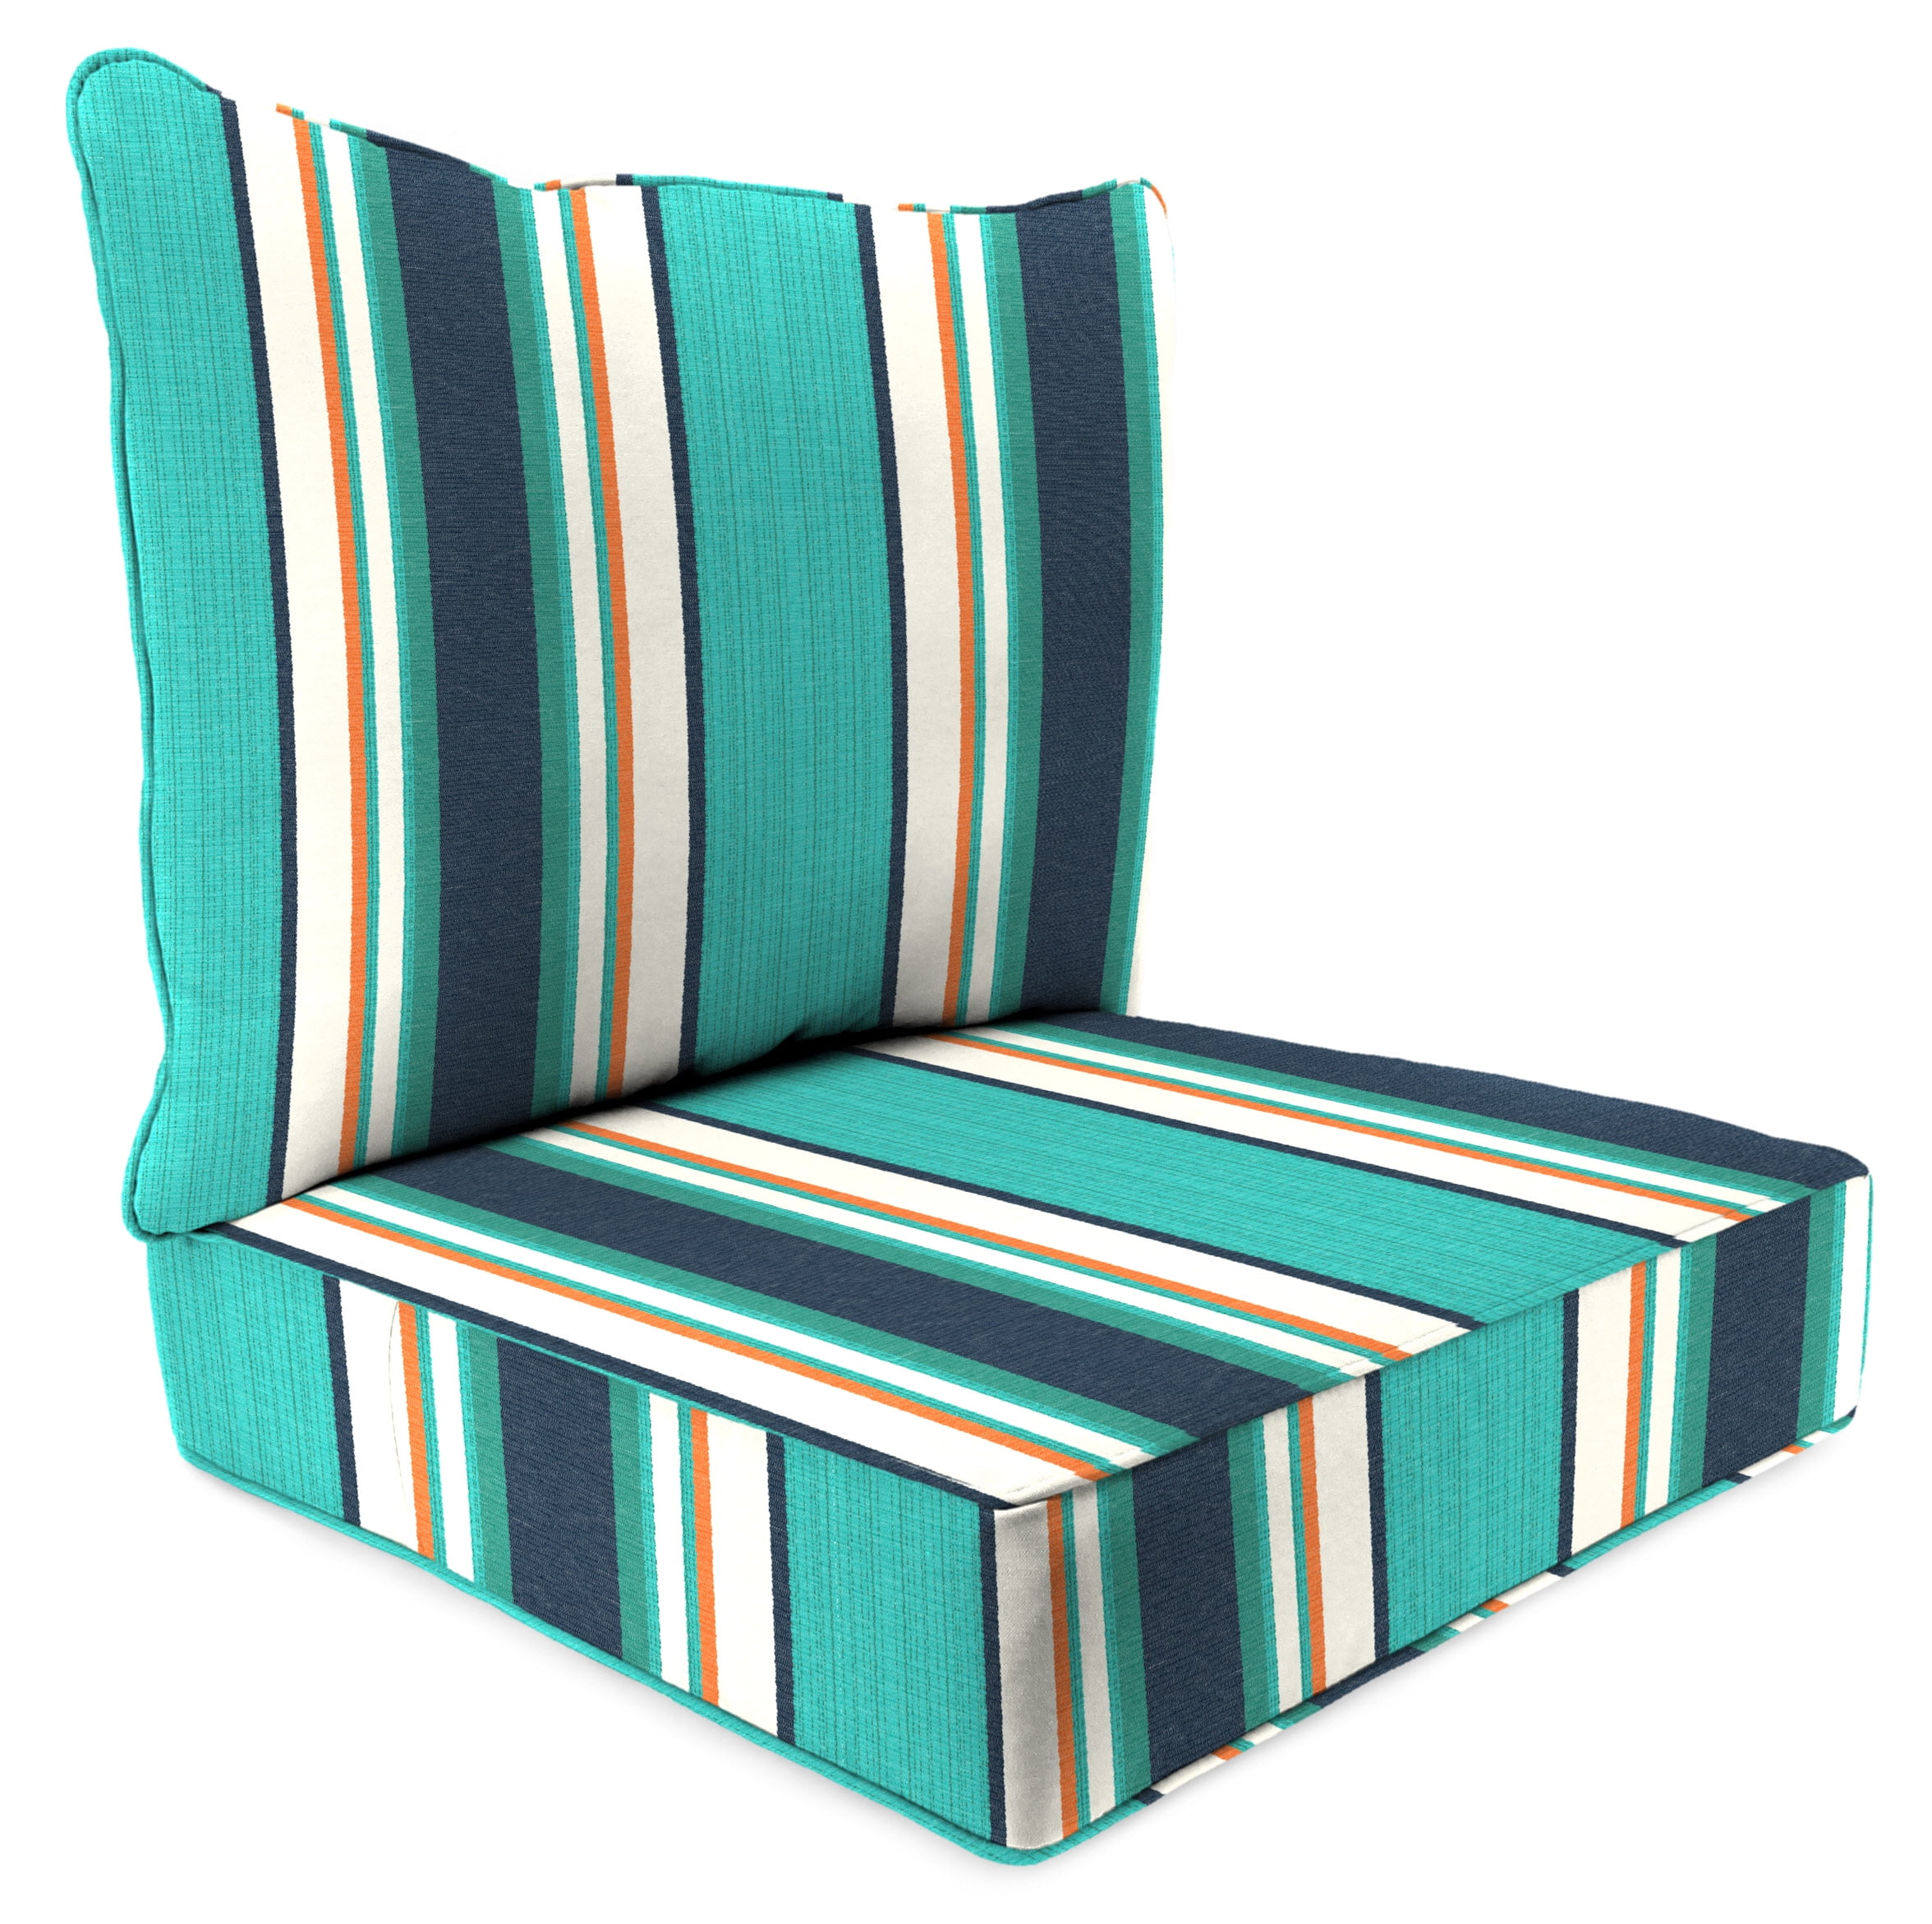 Waterproof Bench Seat Cushions For Outdoor Furniture : Outdoor Seat ...